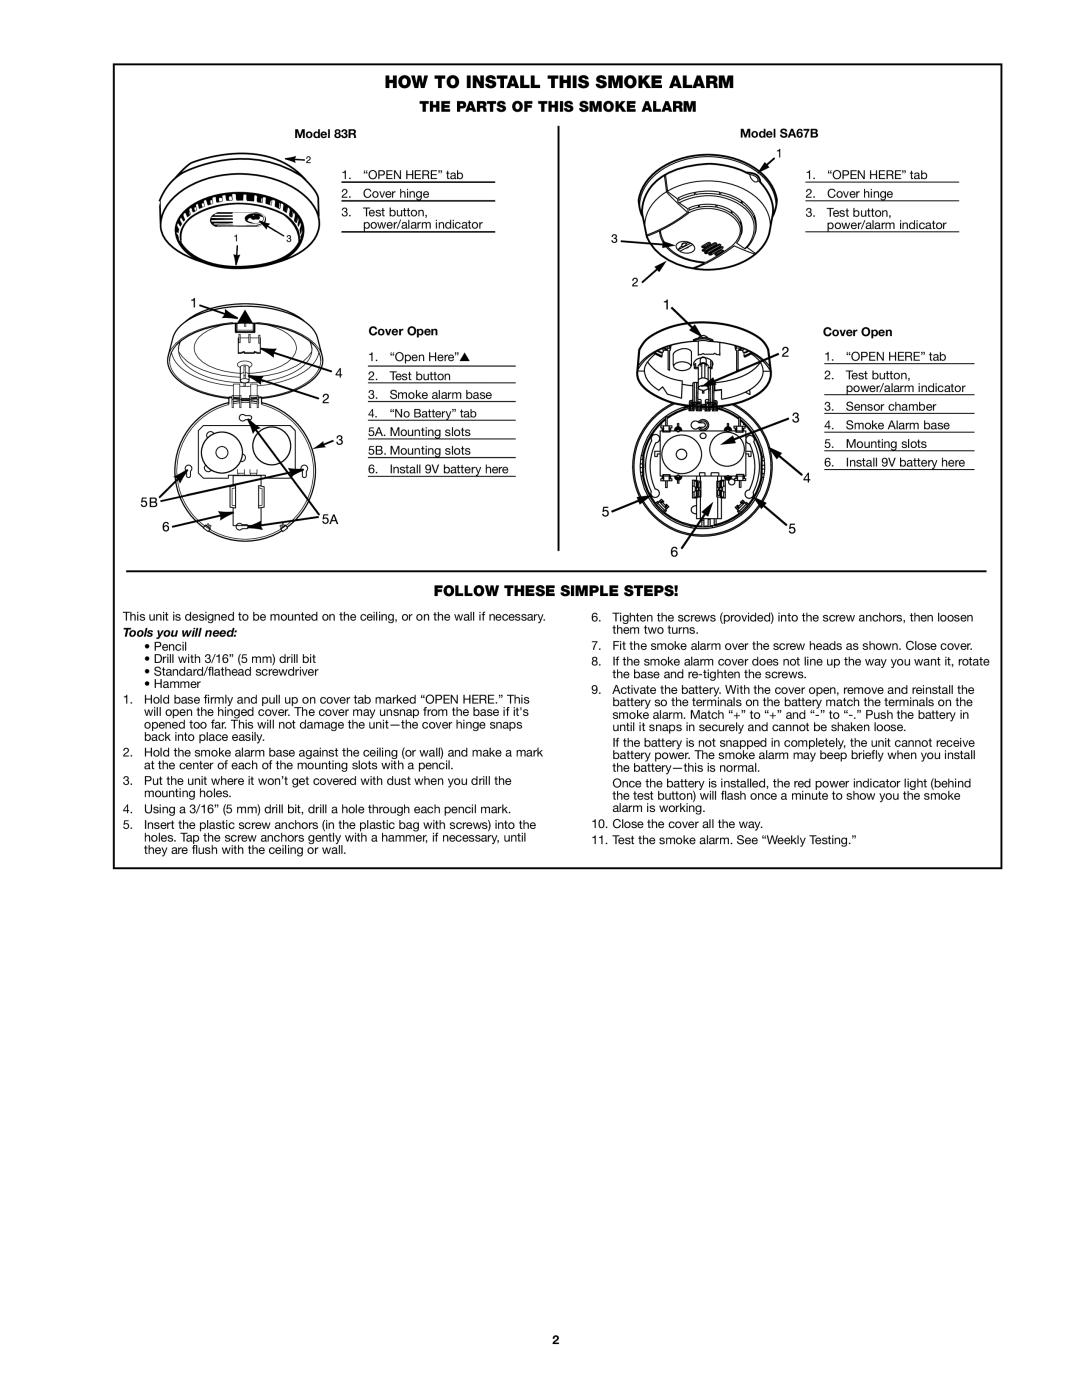 BRK electronic 83R, SA67B user manual HOW to Install this Smoke Alarm, Parts of this Smoke Alarm, Follow These Simple Steps 